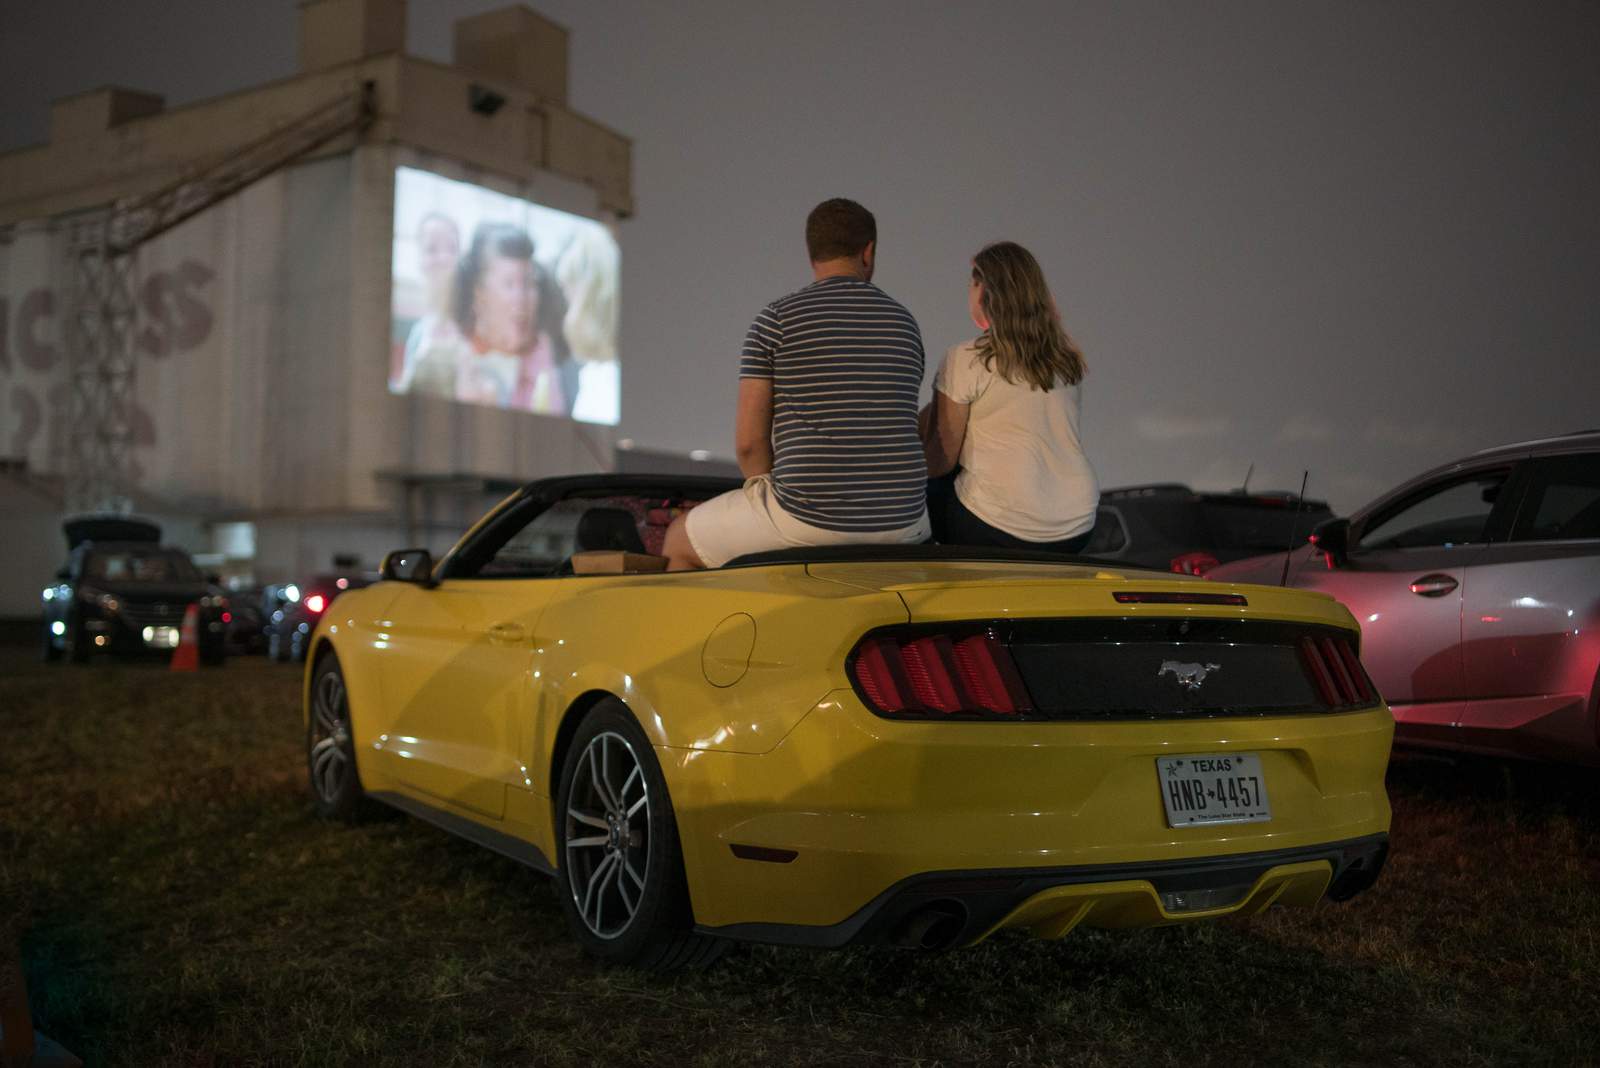 Rooftop Cinema Club to bring drive-in to San Antonio